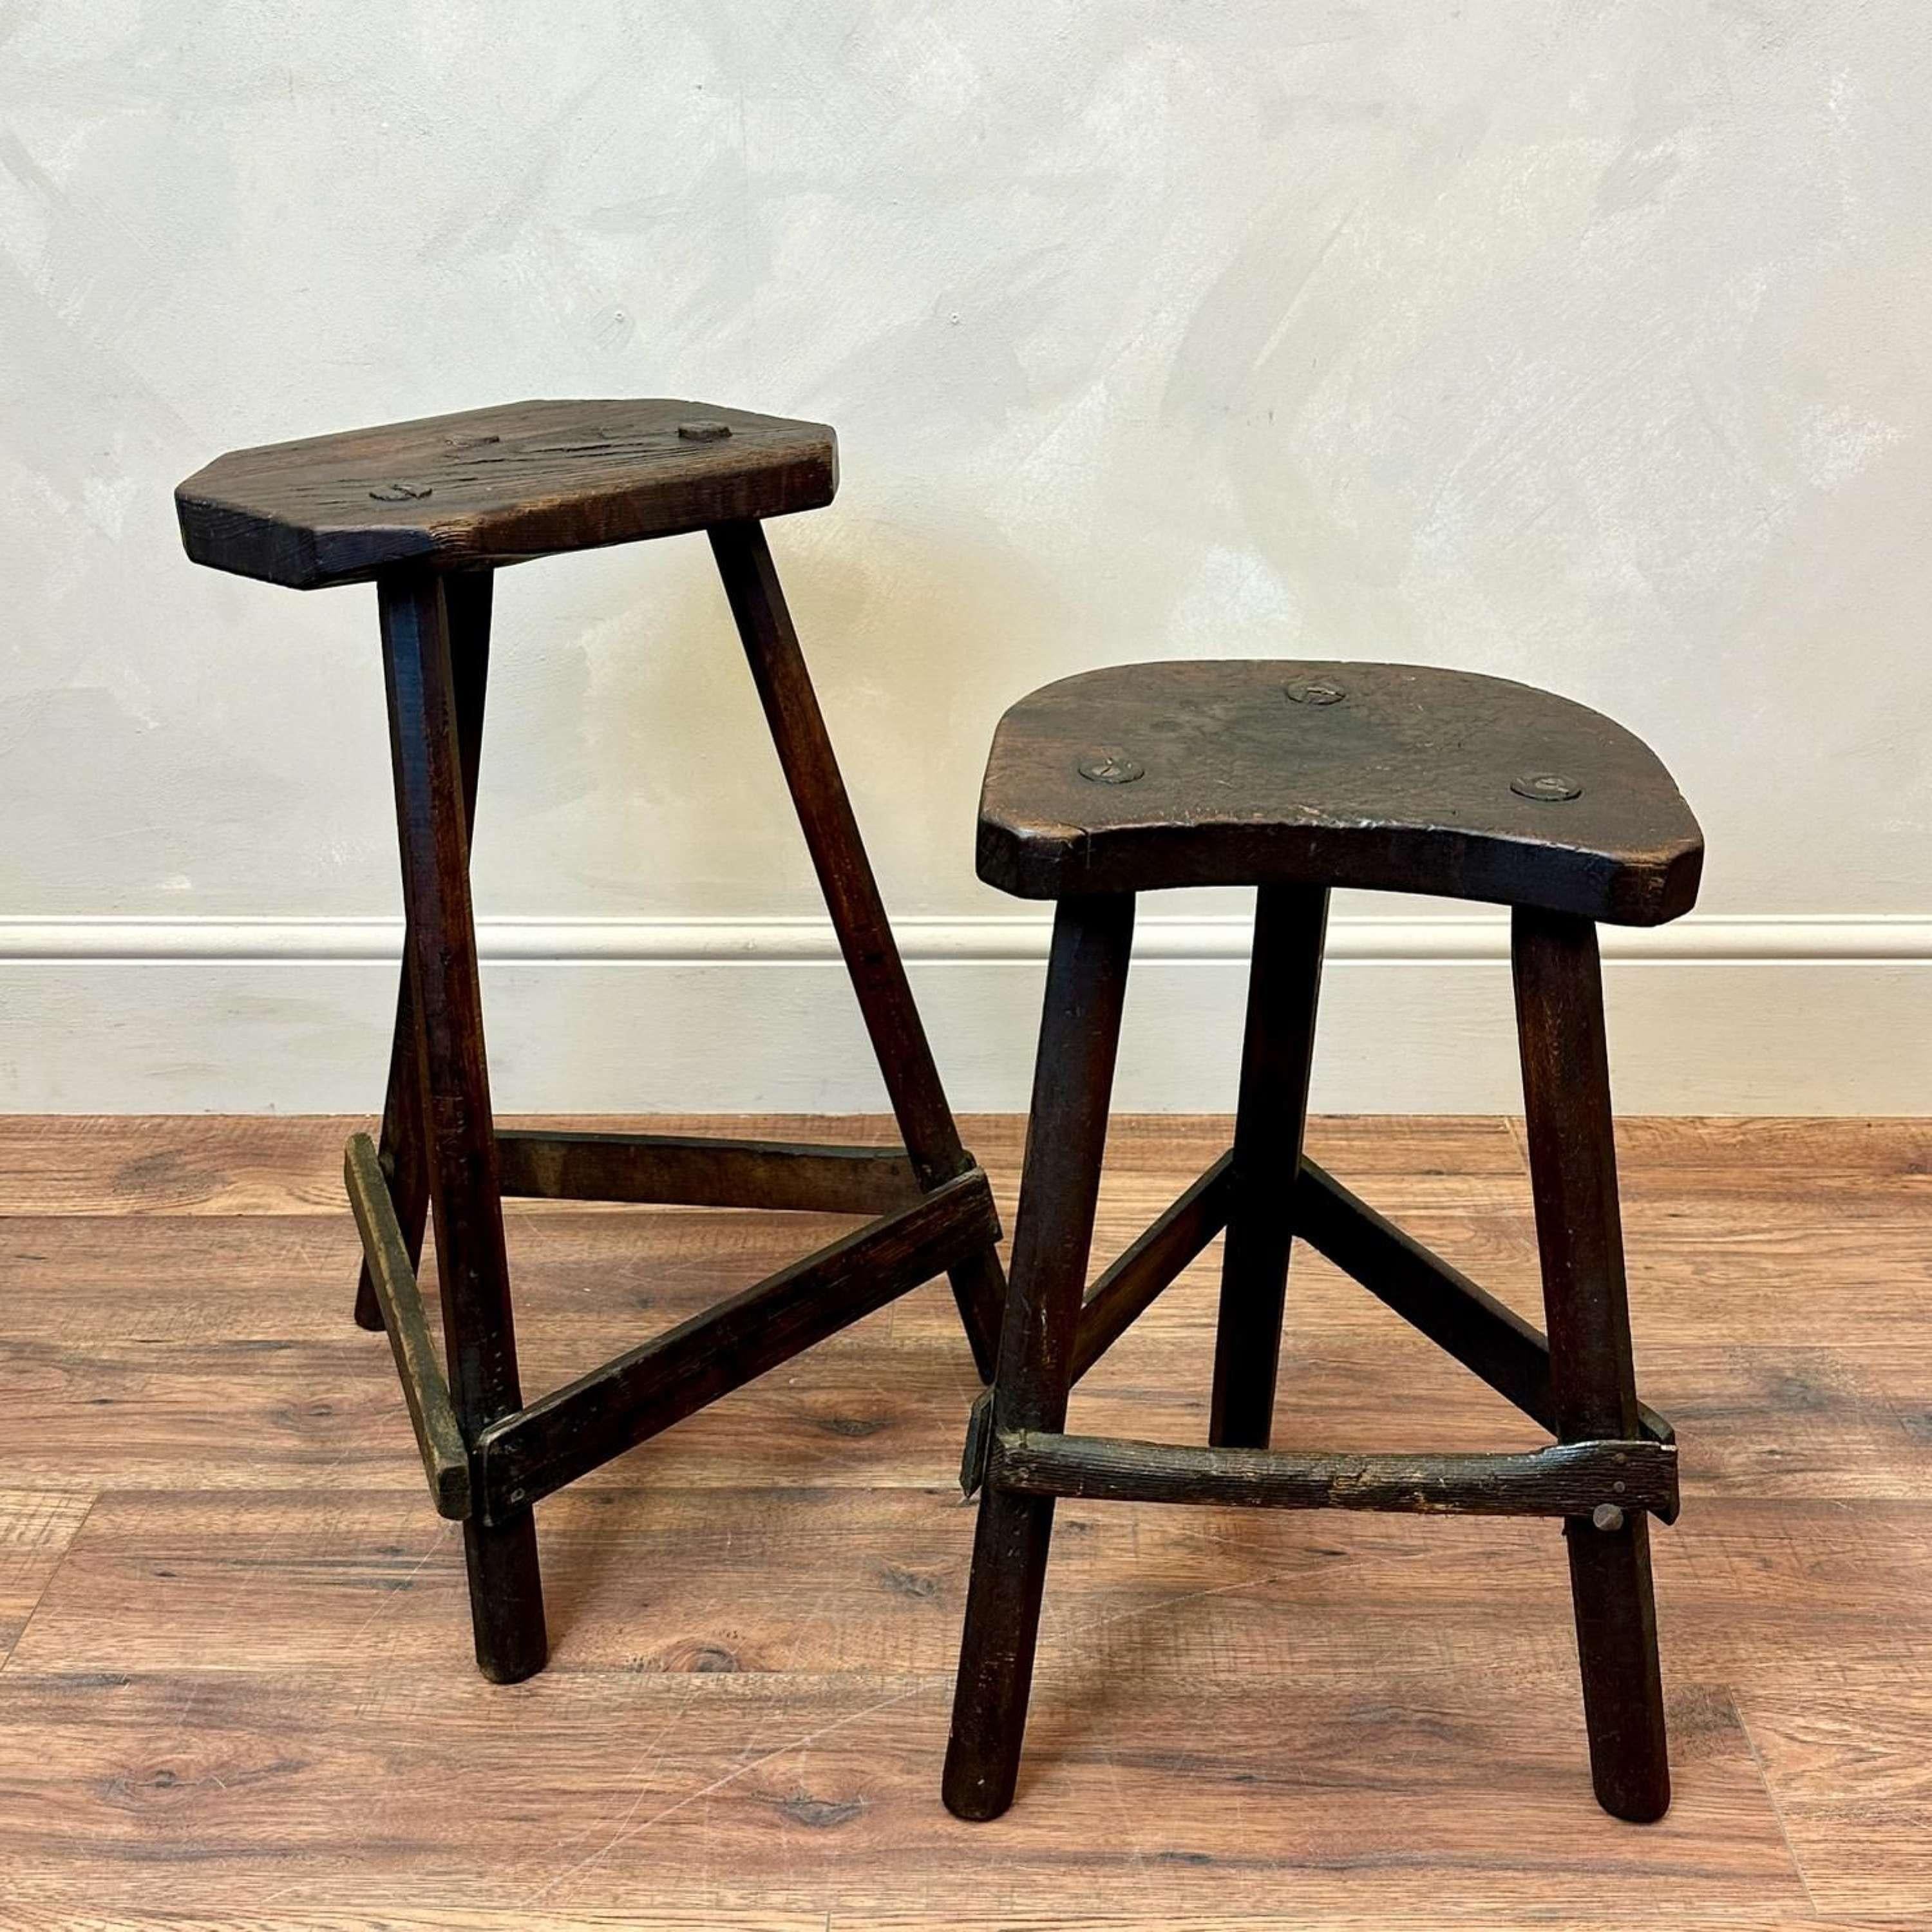 A wonderful example of a pair of antique Cutler Stools from Sheffield, South Yorkshire.
Fantastic colour and wear from years of use, these are unique to the Sheffield cutlery and silver industry and were made by workers themselves from the late 18th